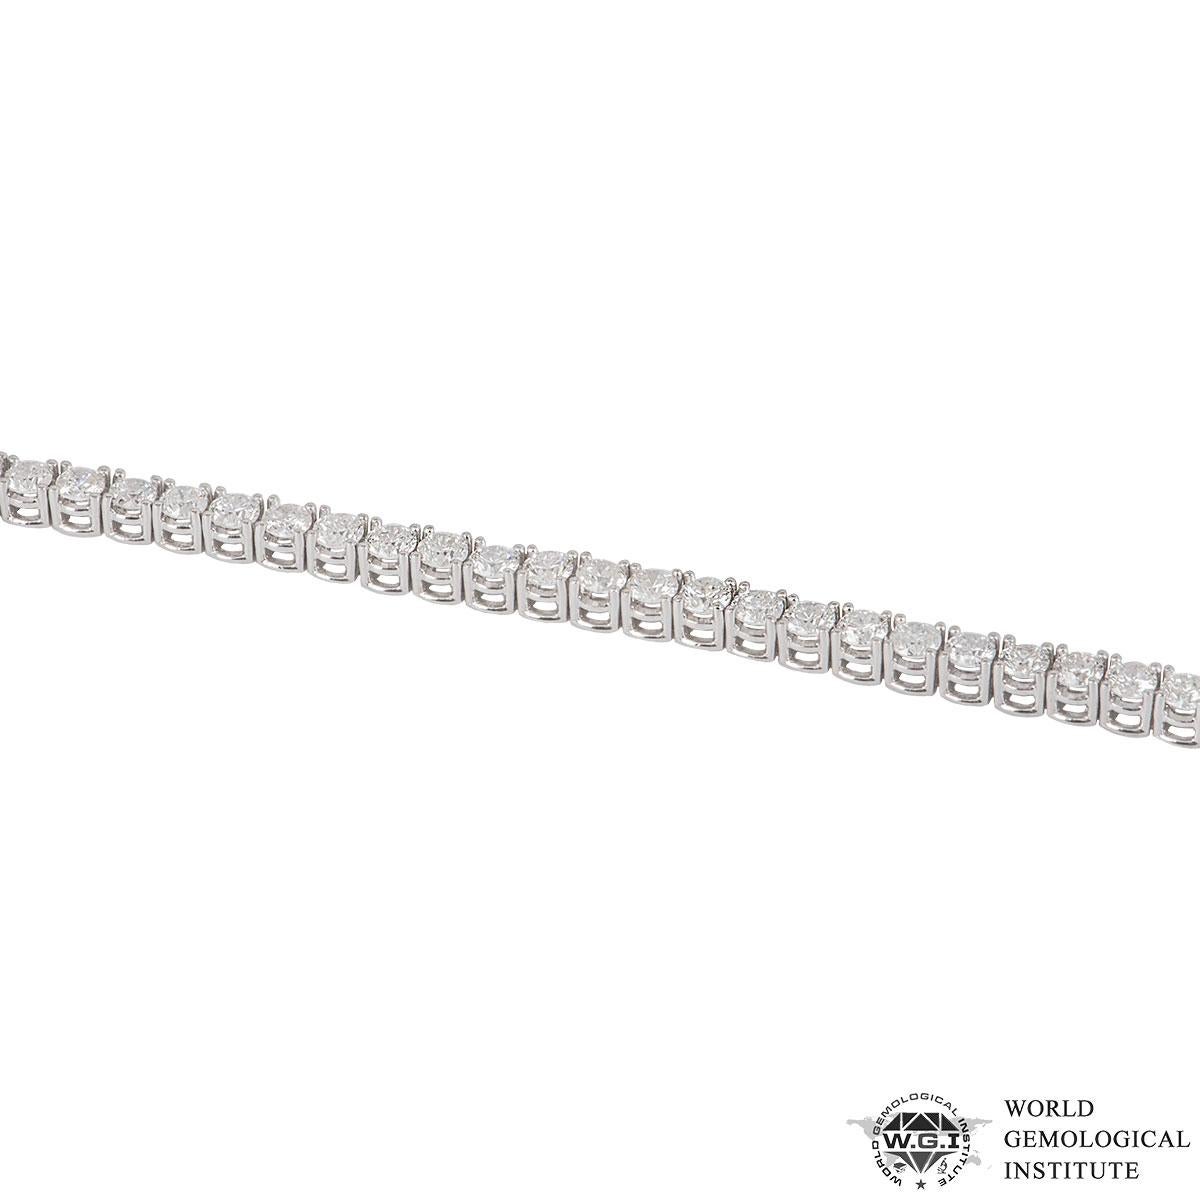 An 18k white gold diamond line bracelet. The bracelet is made up of 57 round brilliant cut diamonds in a four claw setting with a weight of 5.62ct, G-H colour and SI clarity. The bracelet measures 7.00 inches in length, complete with a box tongue